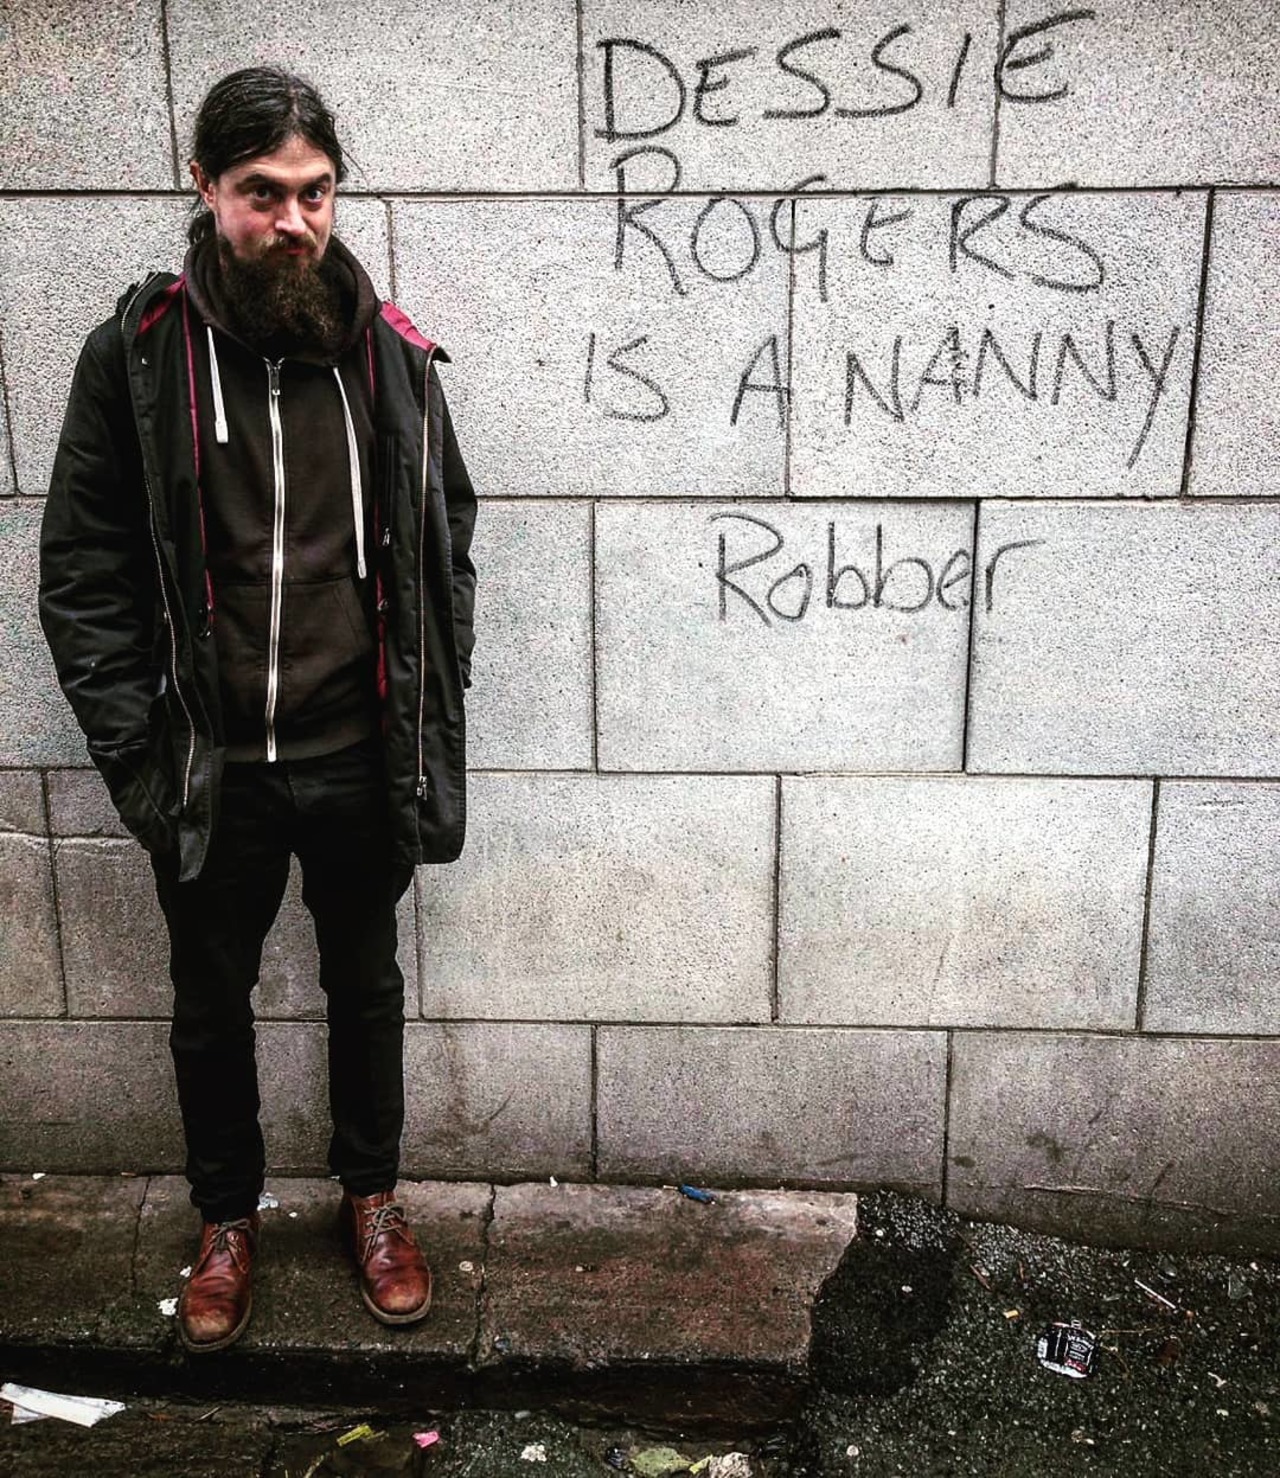 The all-new Cossie's Street Art series, installment #4: 'Dessie Rogers is a Nanny Robber'. #DessieRogersisaNannyRobber #DessieRogers #dublin #streetart #graffiti #grafitti #nannyrobber #nannylife #robber #robbery #nannyrobbery #thewordsoftheprophetswerewrittenonthesubwaywalls https://t.co/dWYtwCo3GI